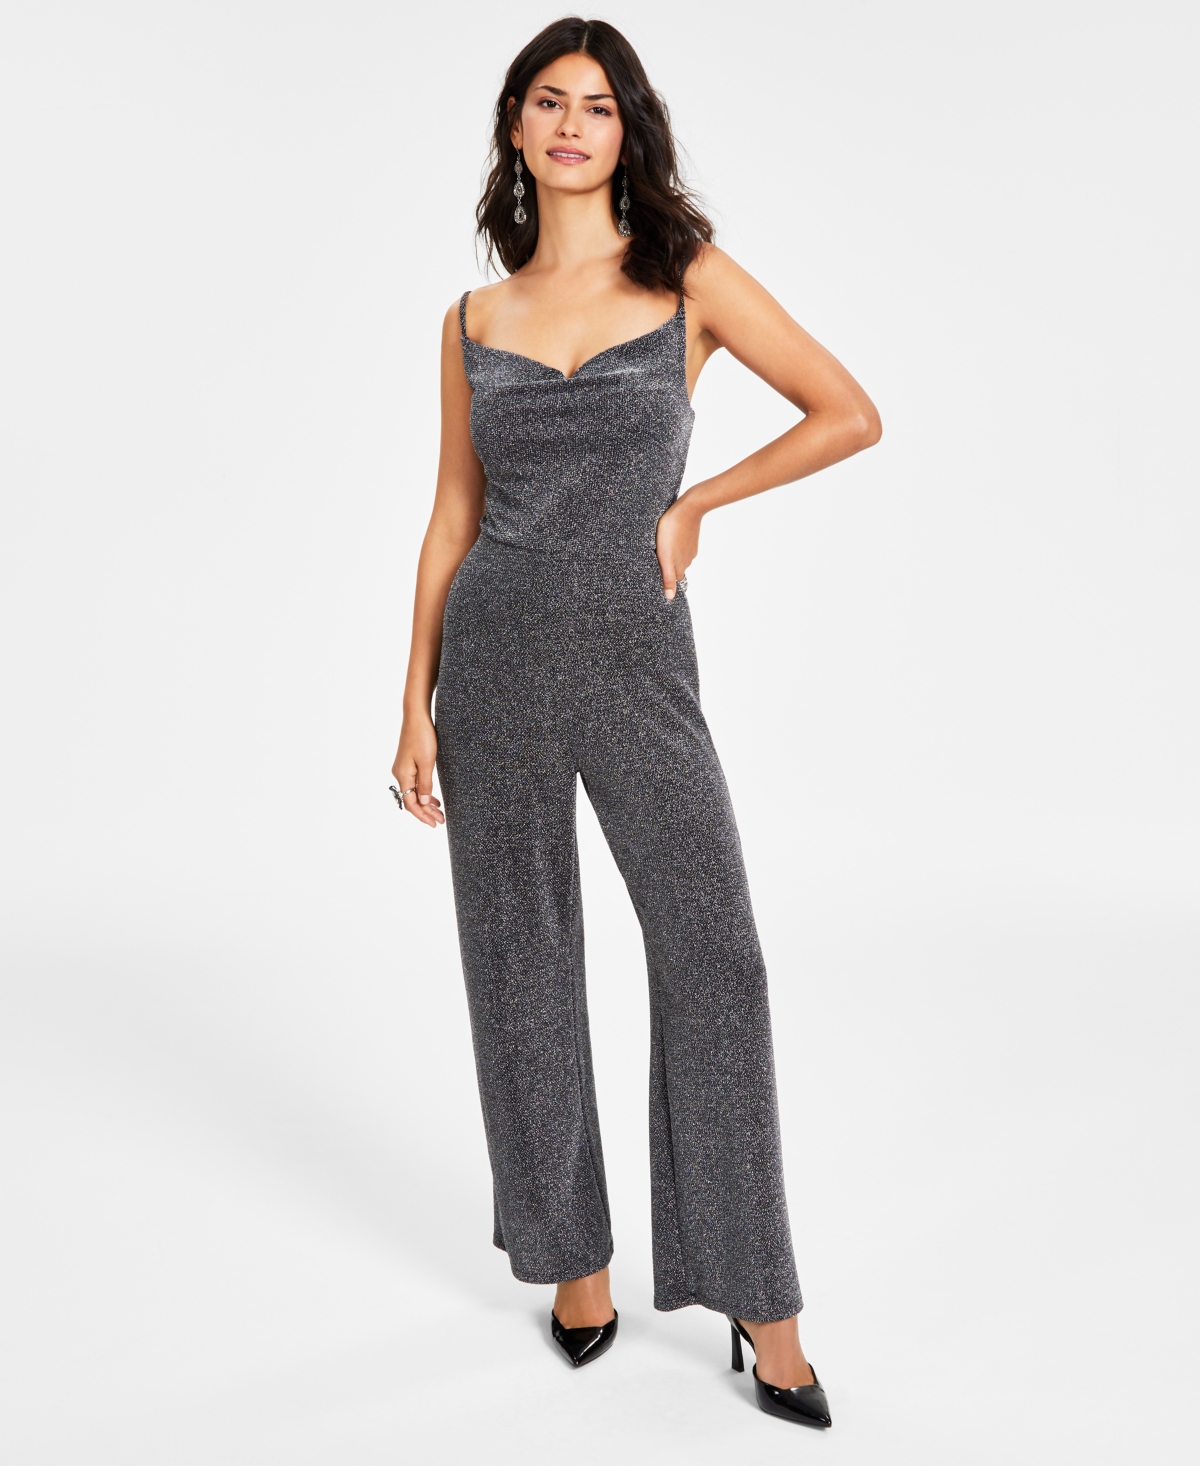 Bar Iii Petite Sparkle-knit Cowlneck Sleeveless Jumpsuit, Created For Macy's In Silver